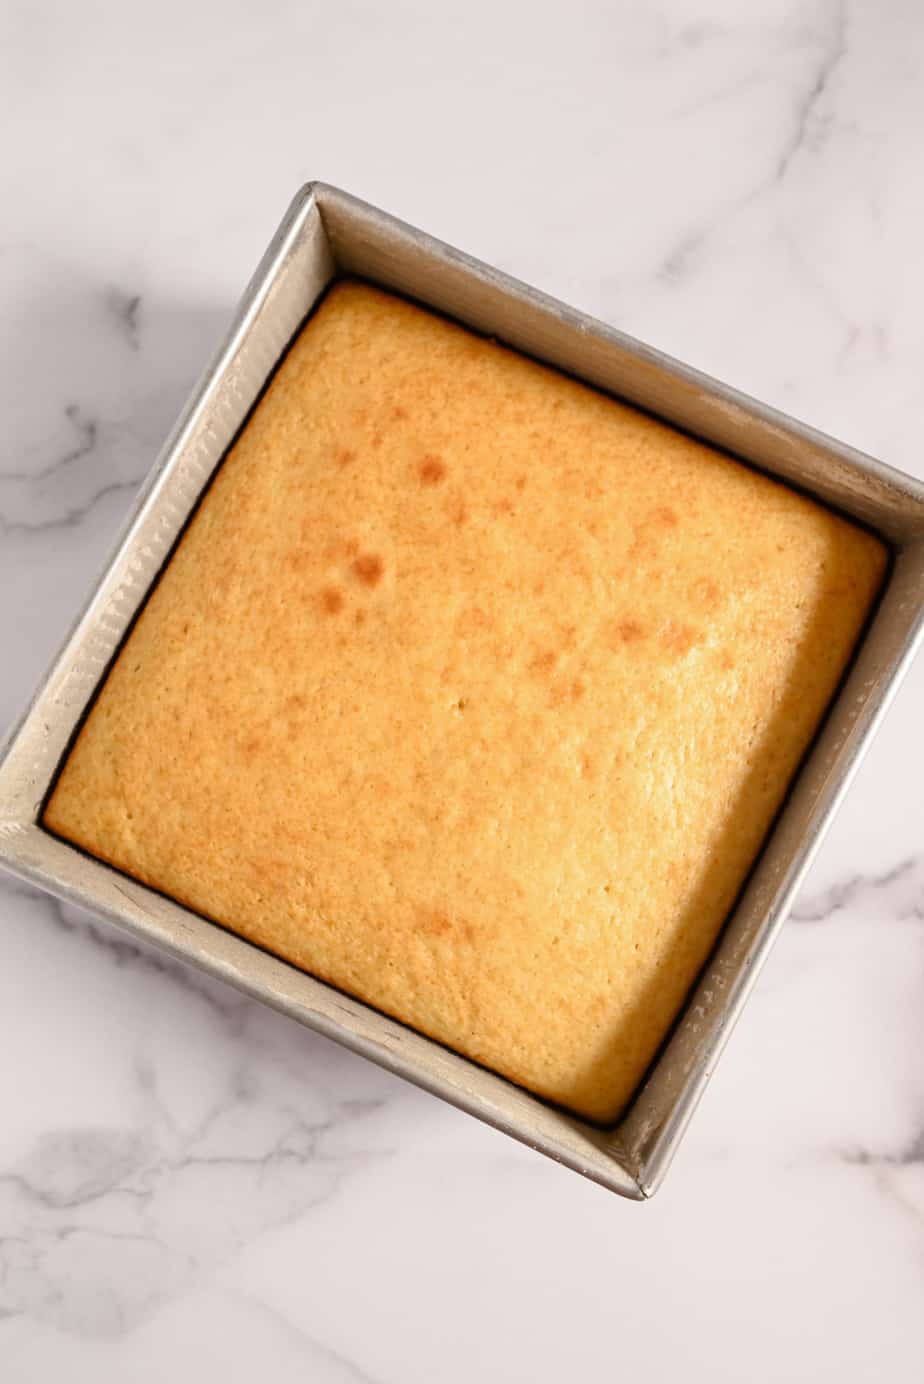 Baked homemade yellow cake in a cake pan, cooling on a marble countertop.